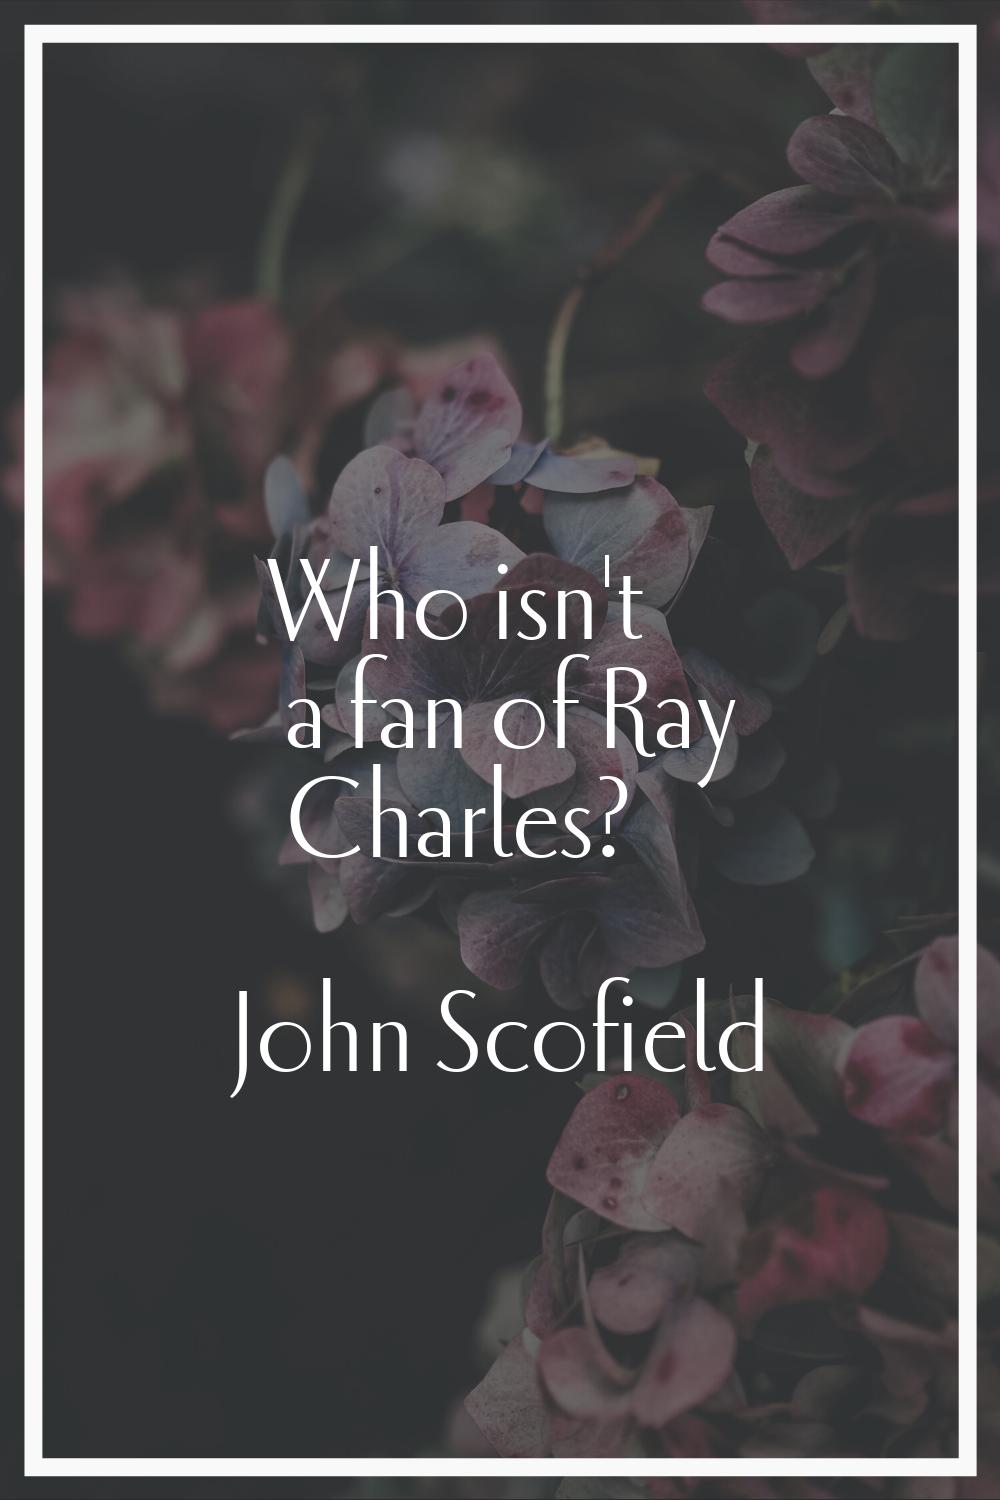 Who isn't a fan of Ray Charles?